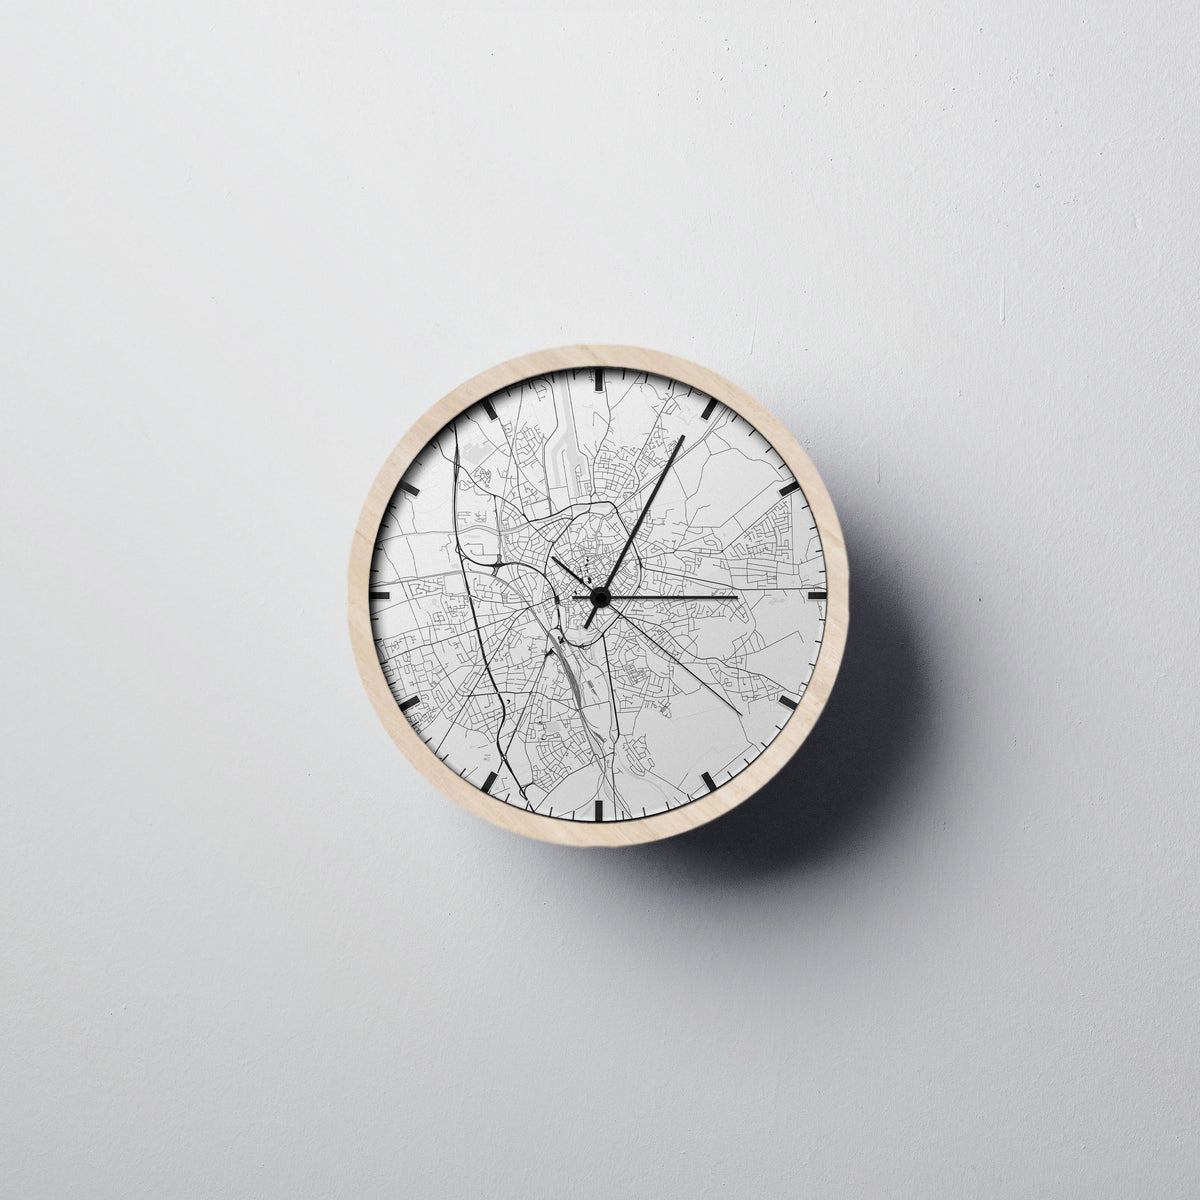 Bruges Wall Clock - Point Two Design